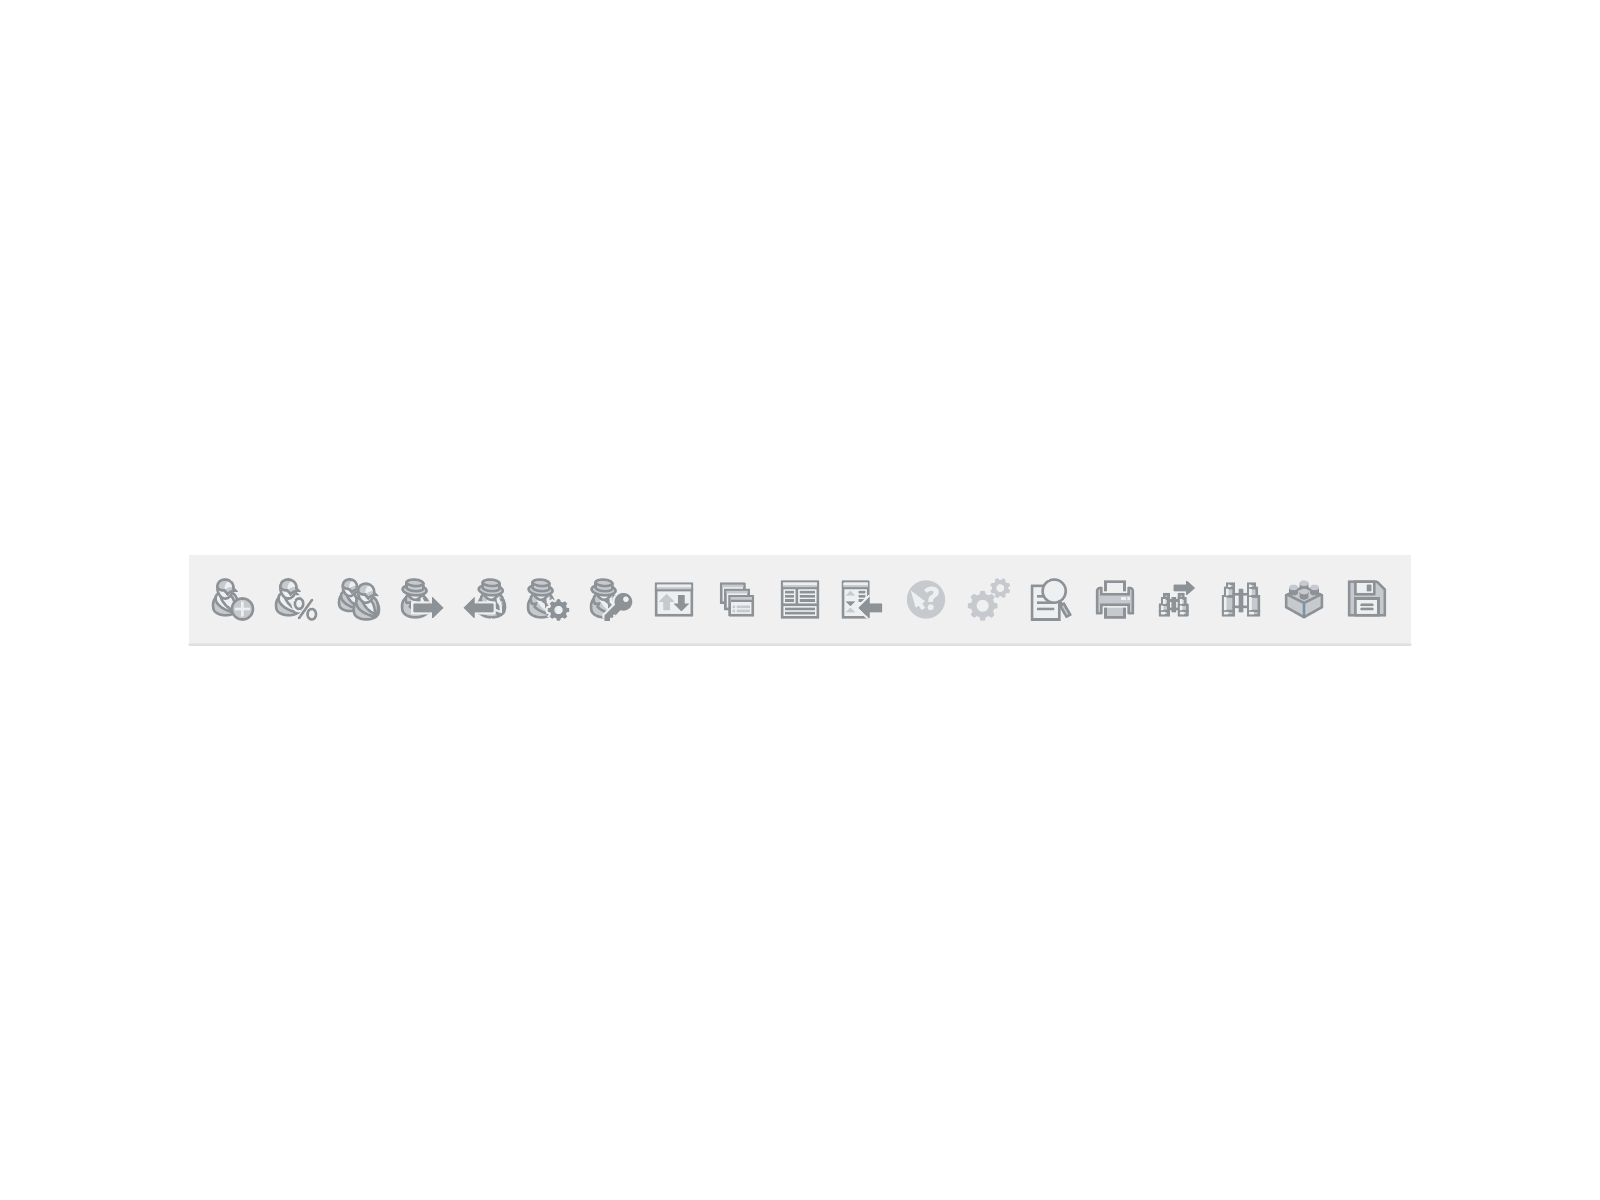 control panel icons icons ui vector